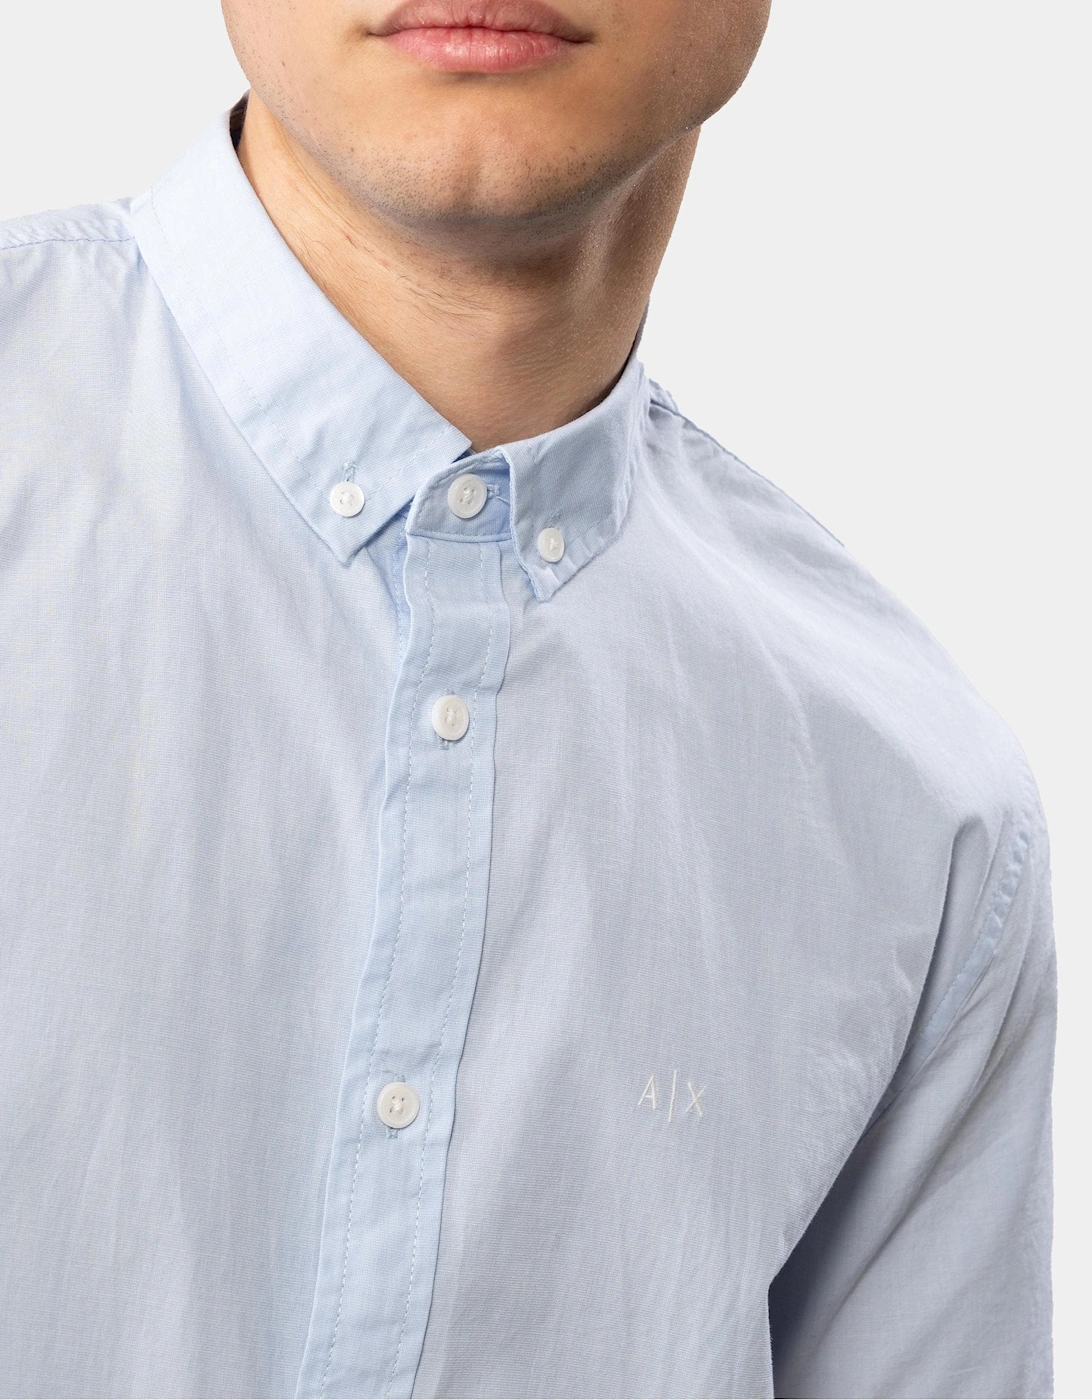 A|X Embroidered Monogram Mens Short Sleeved Shirt